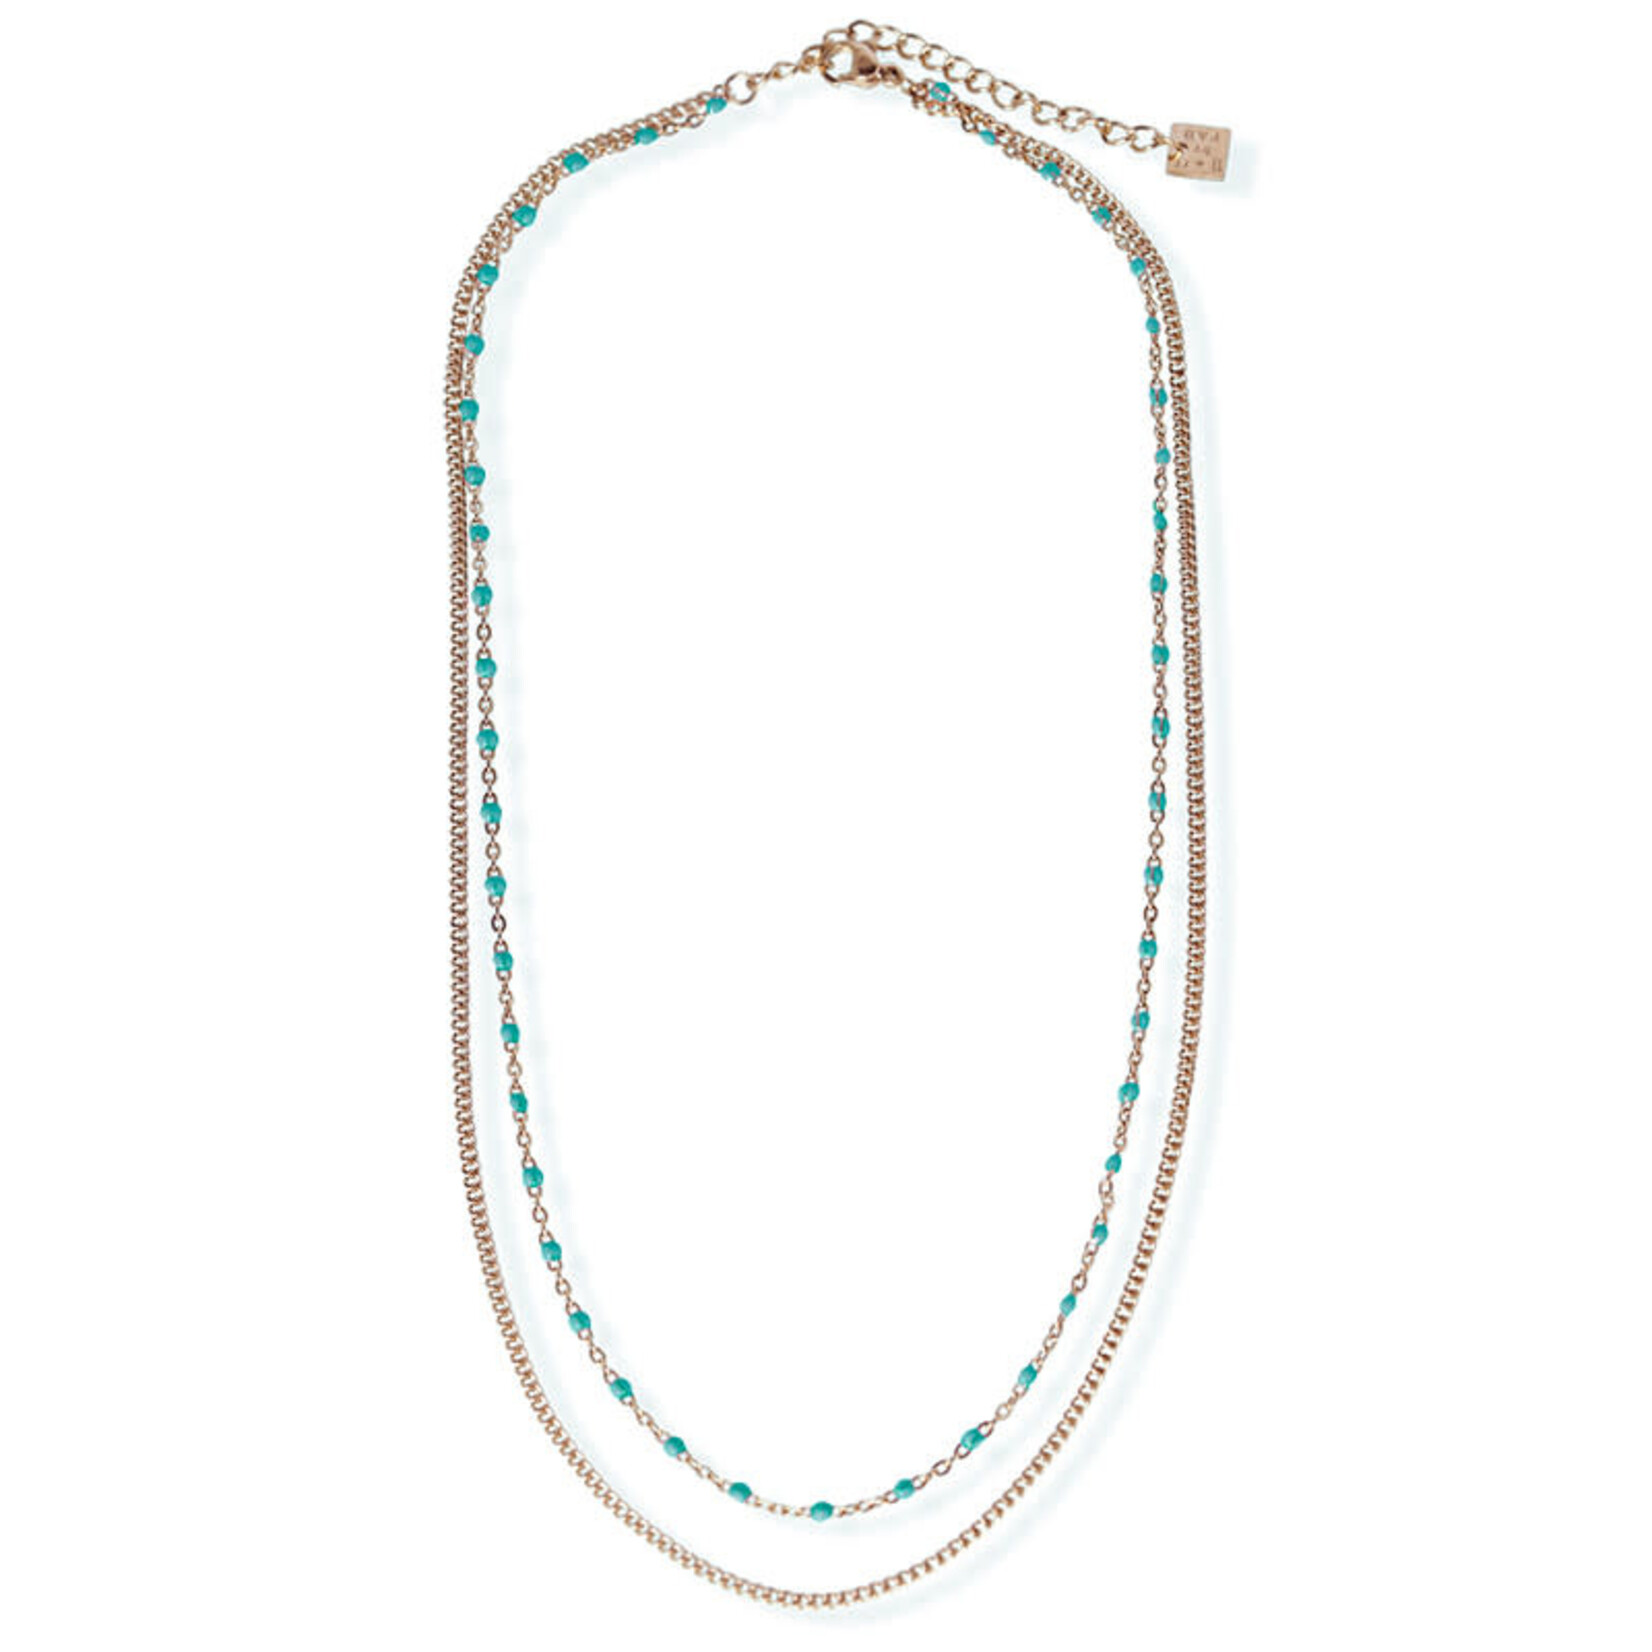 FAB Accessories Turquoise Ball & Chain Necklace -